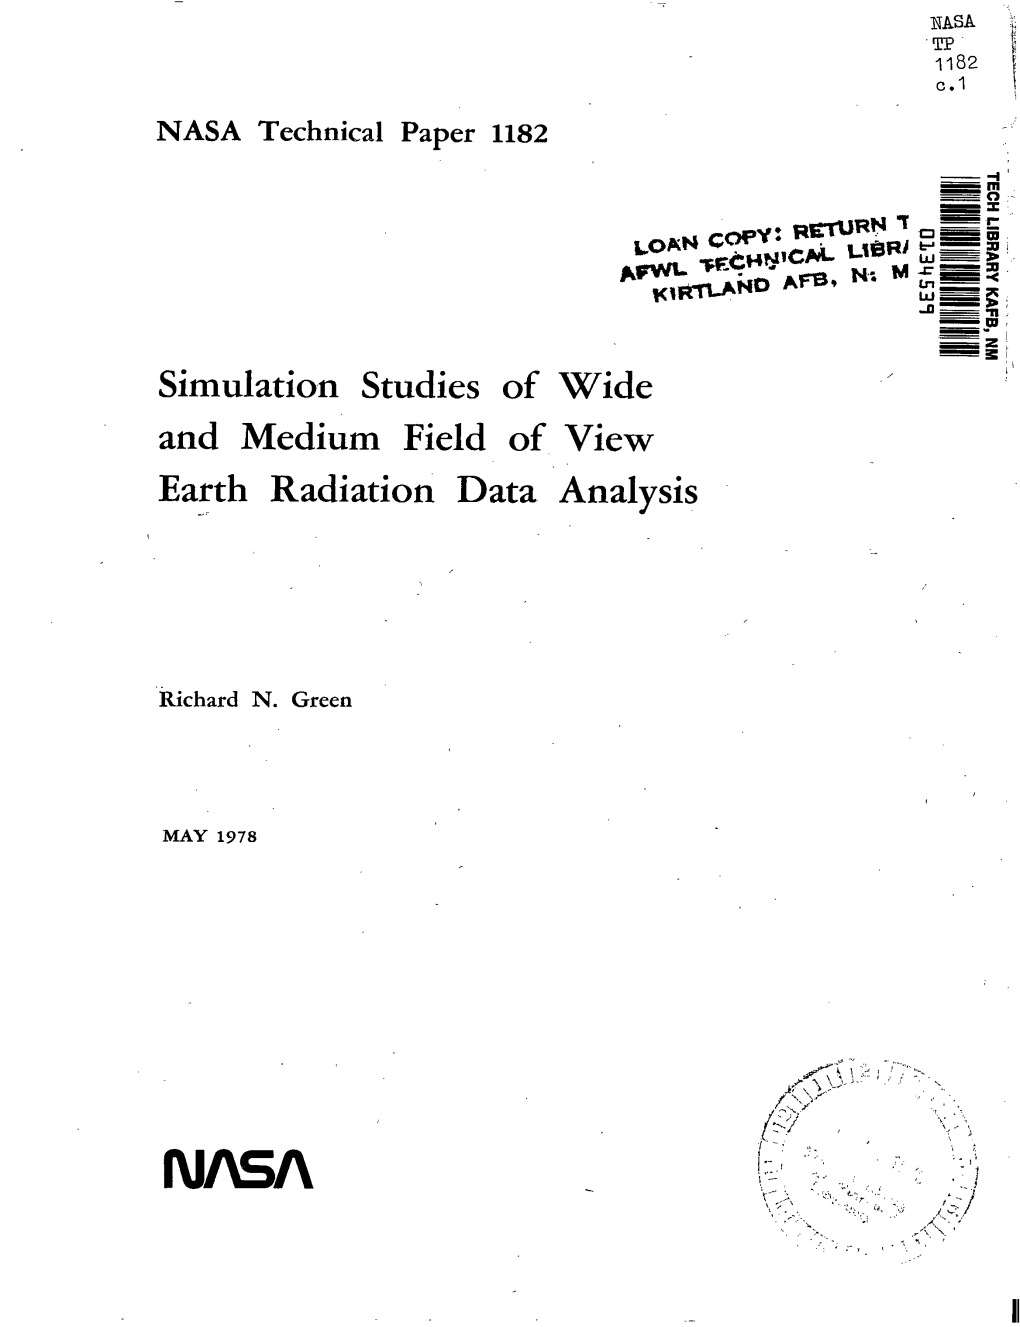 Simulation Studies of Wide and Medium Field of View Earth Radiation Data Analysis